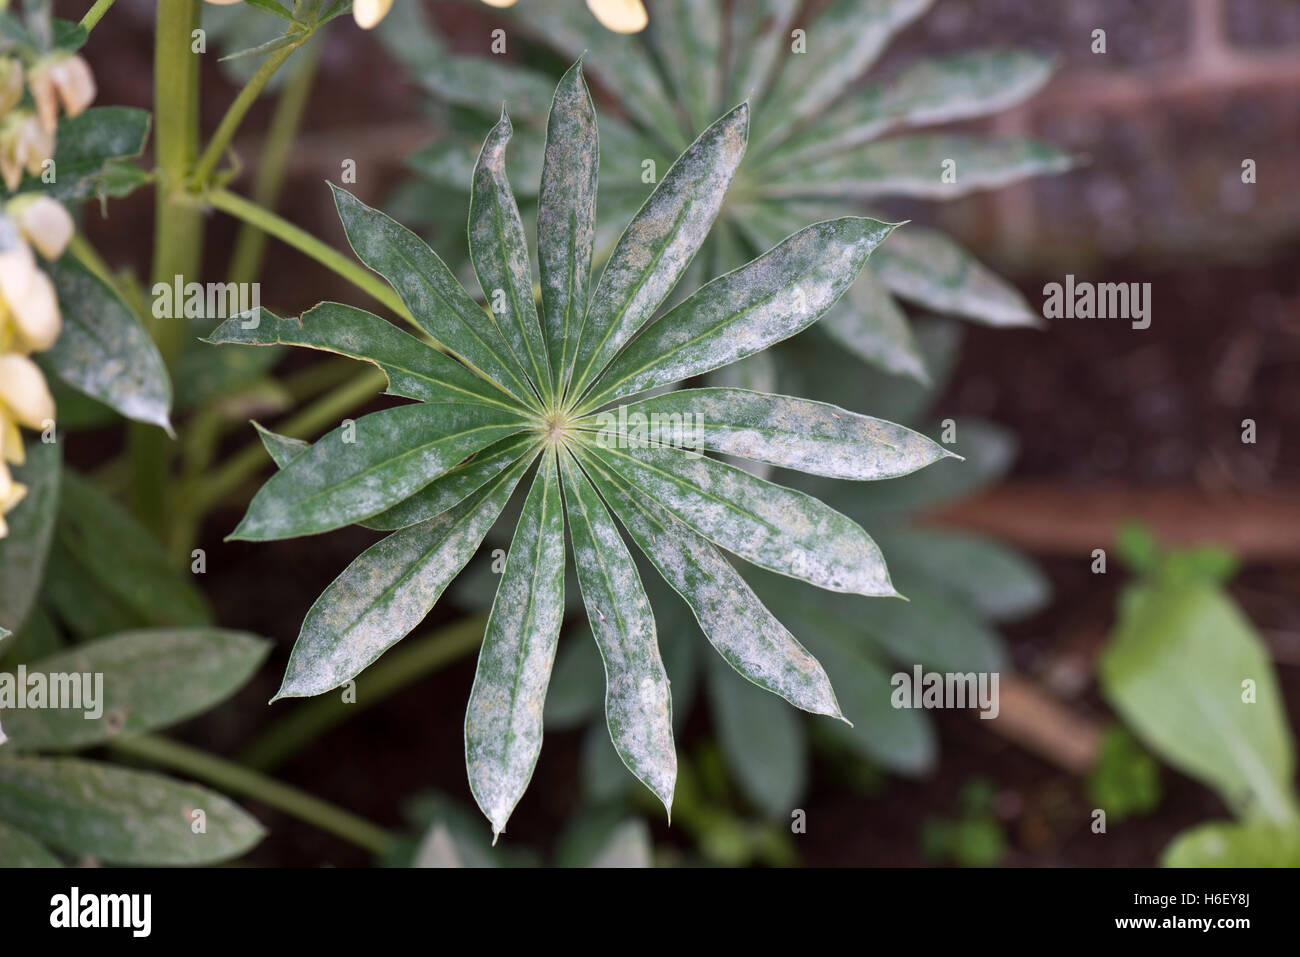 Powdery mildew on lupin, Lupinus sp., leaves Stock Photo